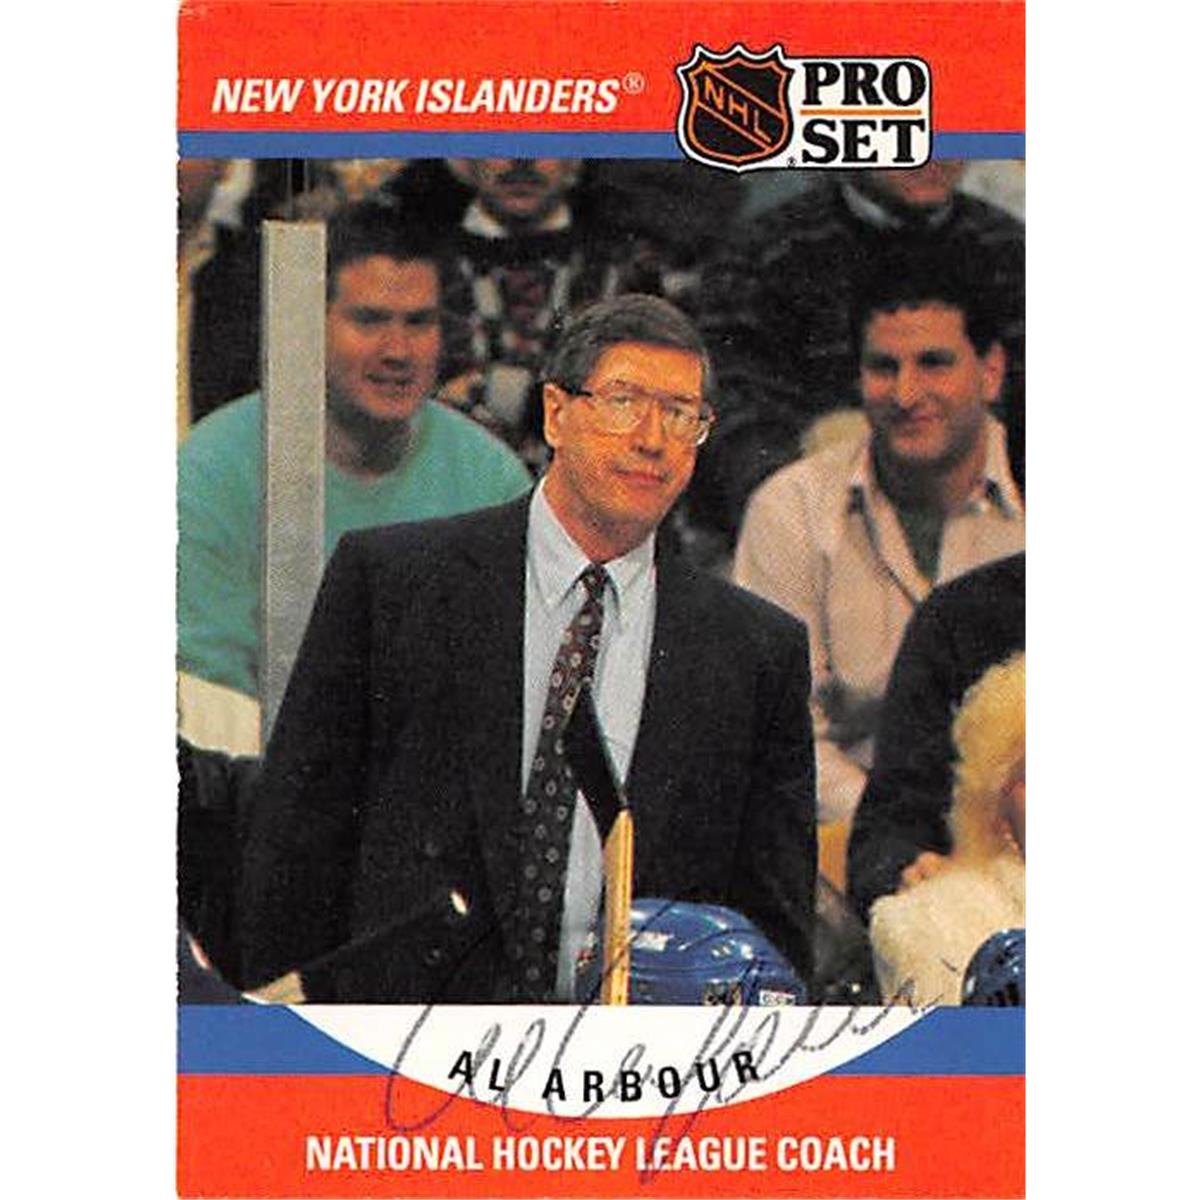 Picture of Autograph Warehouse 377436 Al Arbour Autographed Hockey Card - New York Islanders Coach Hall of Fame 67 1990 Pro Set No.671